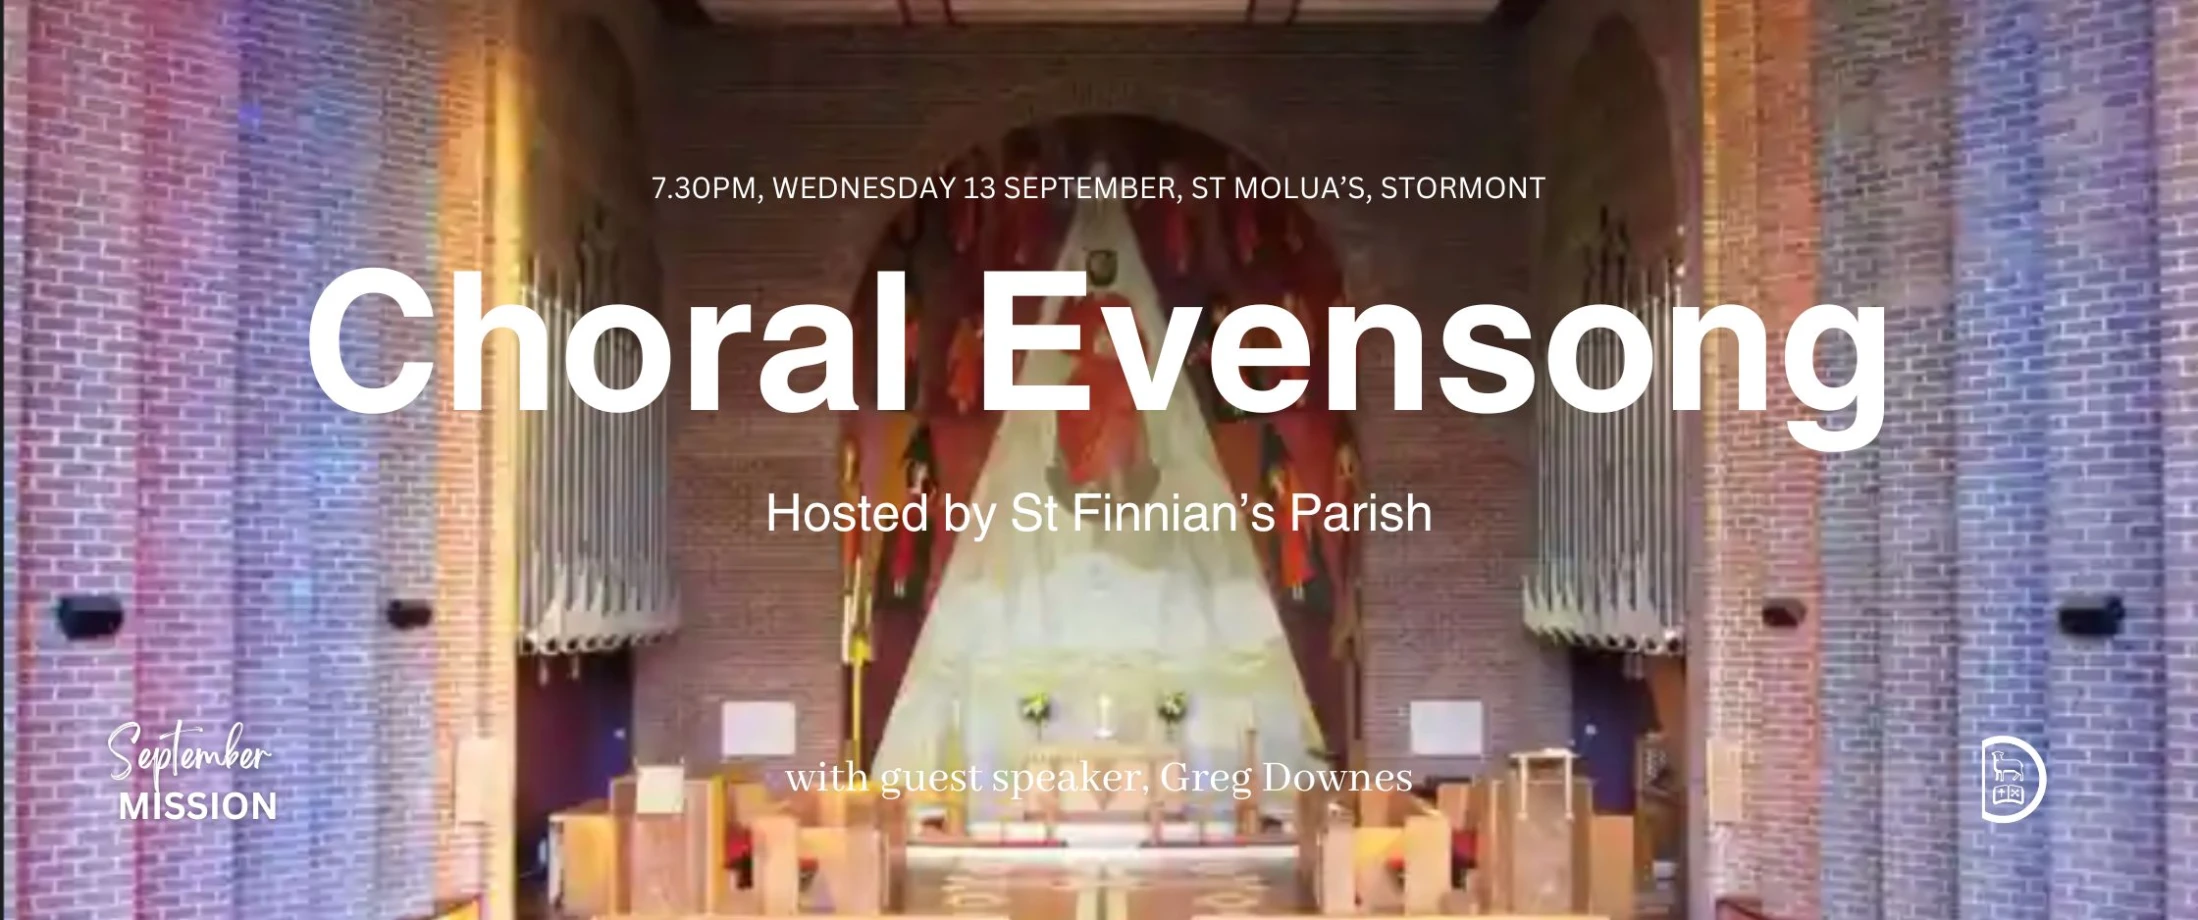 Service of Choral Evensong